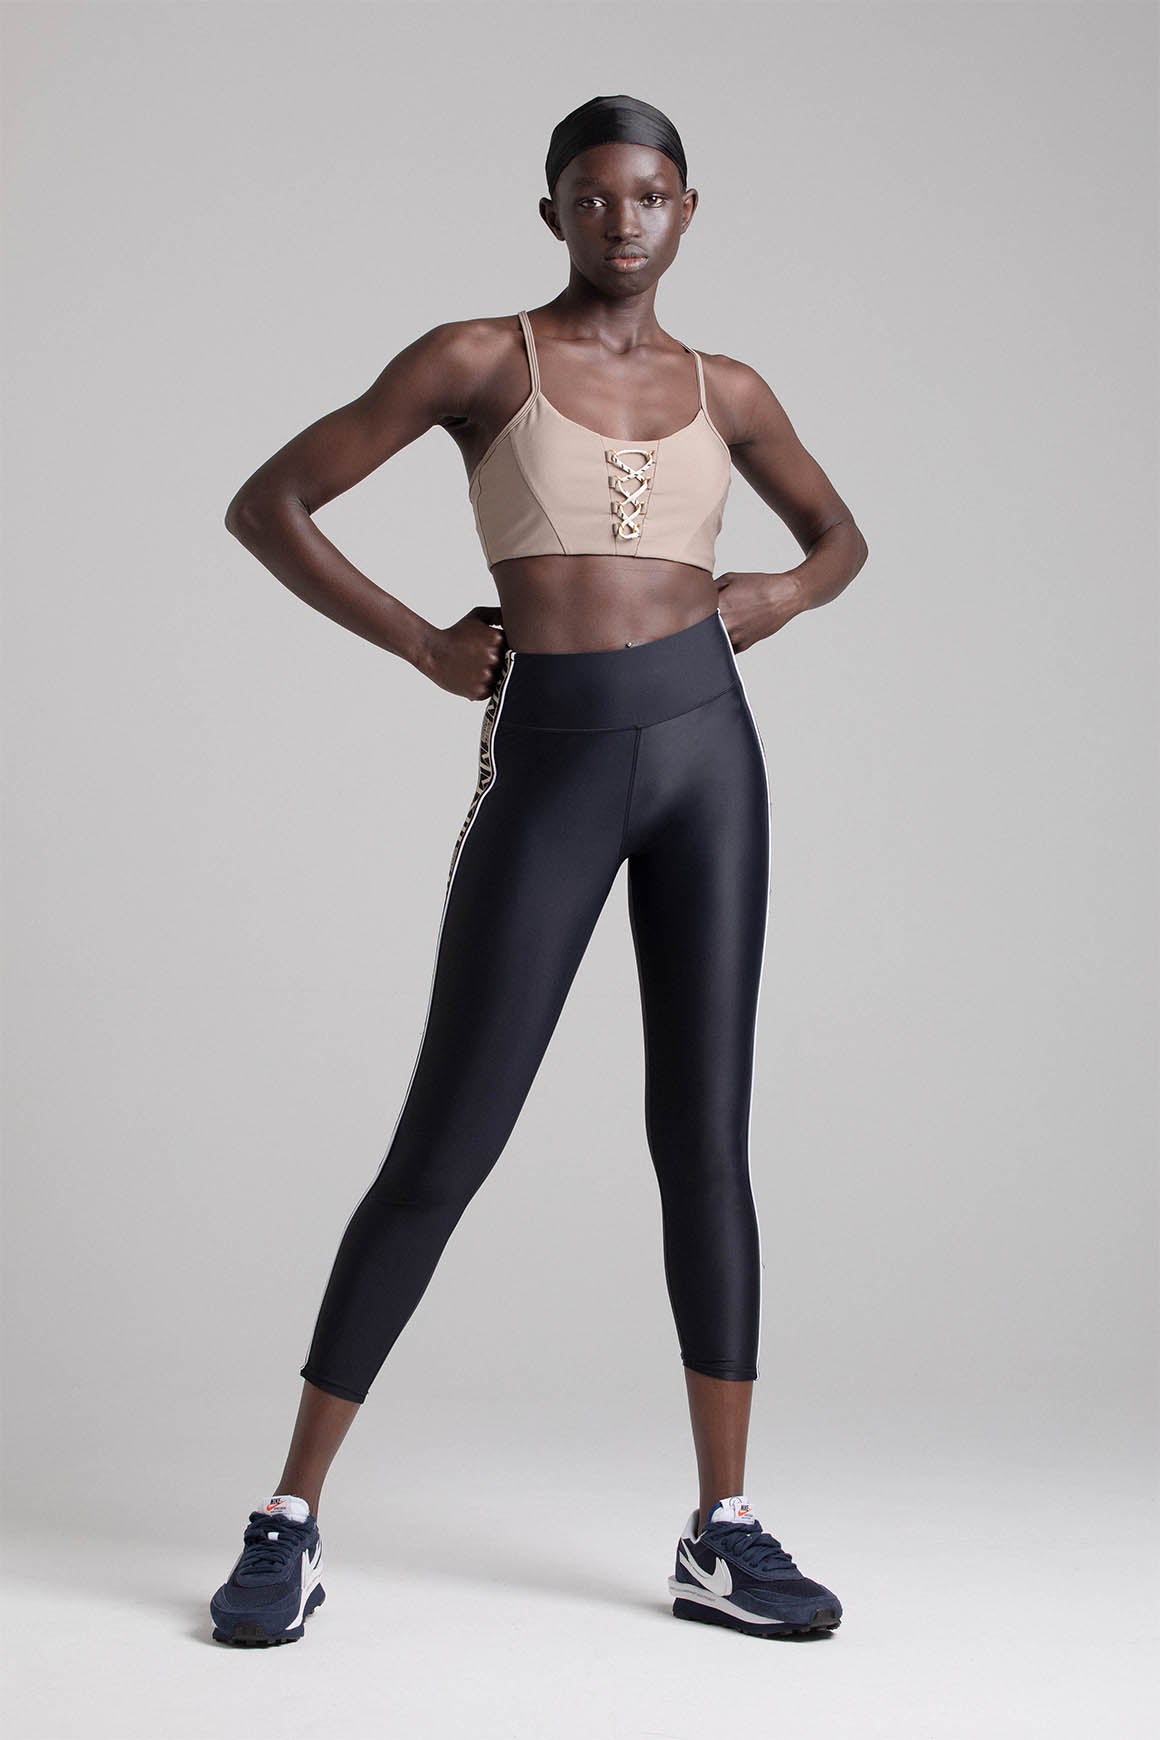 Women's Cropped Running Tights - Black